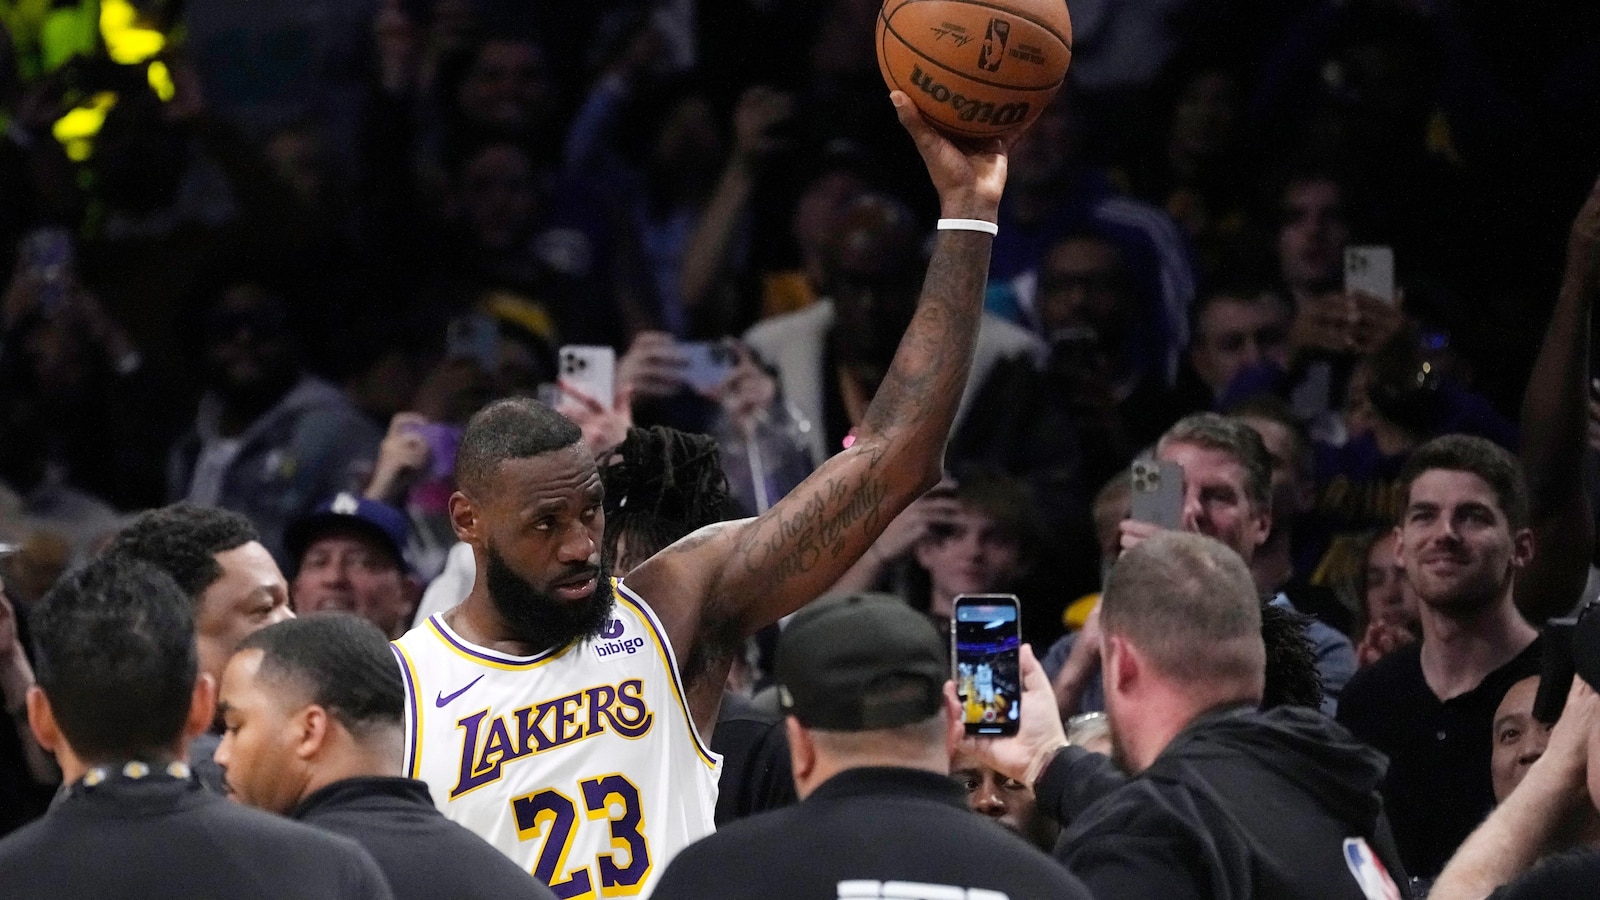 LeBron James reaches 40,000 points to extend his record as the NBA's scoring leader